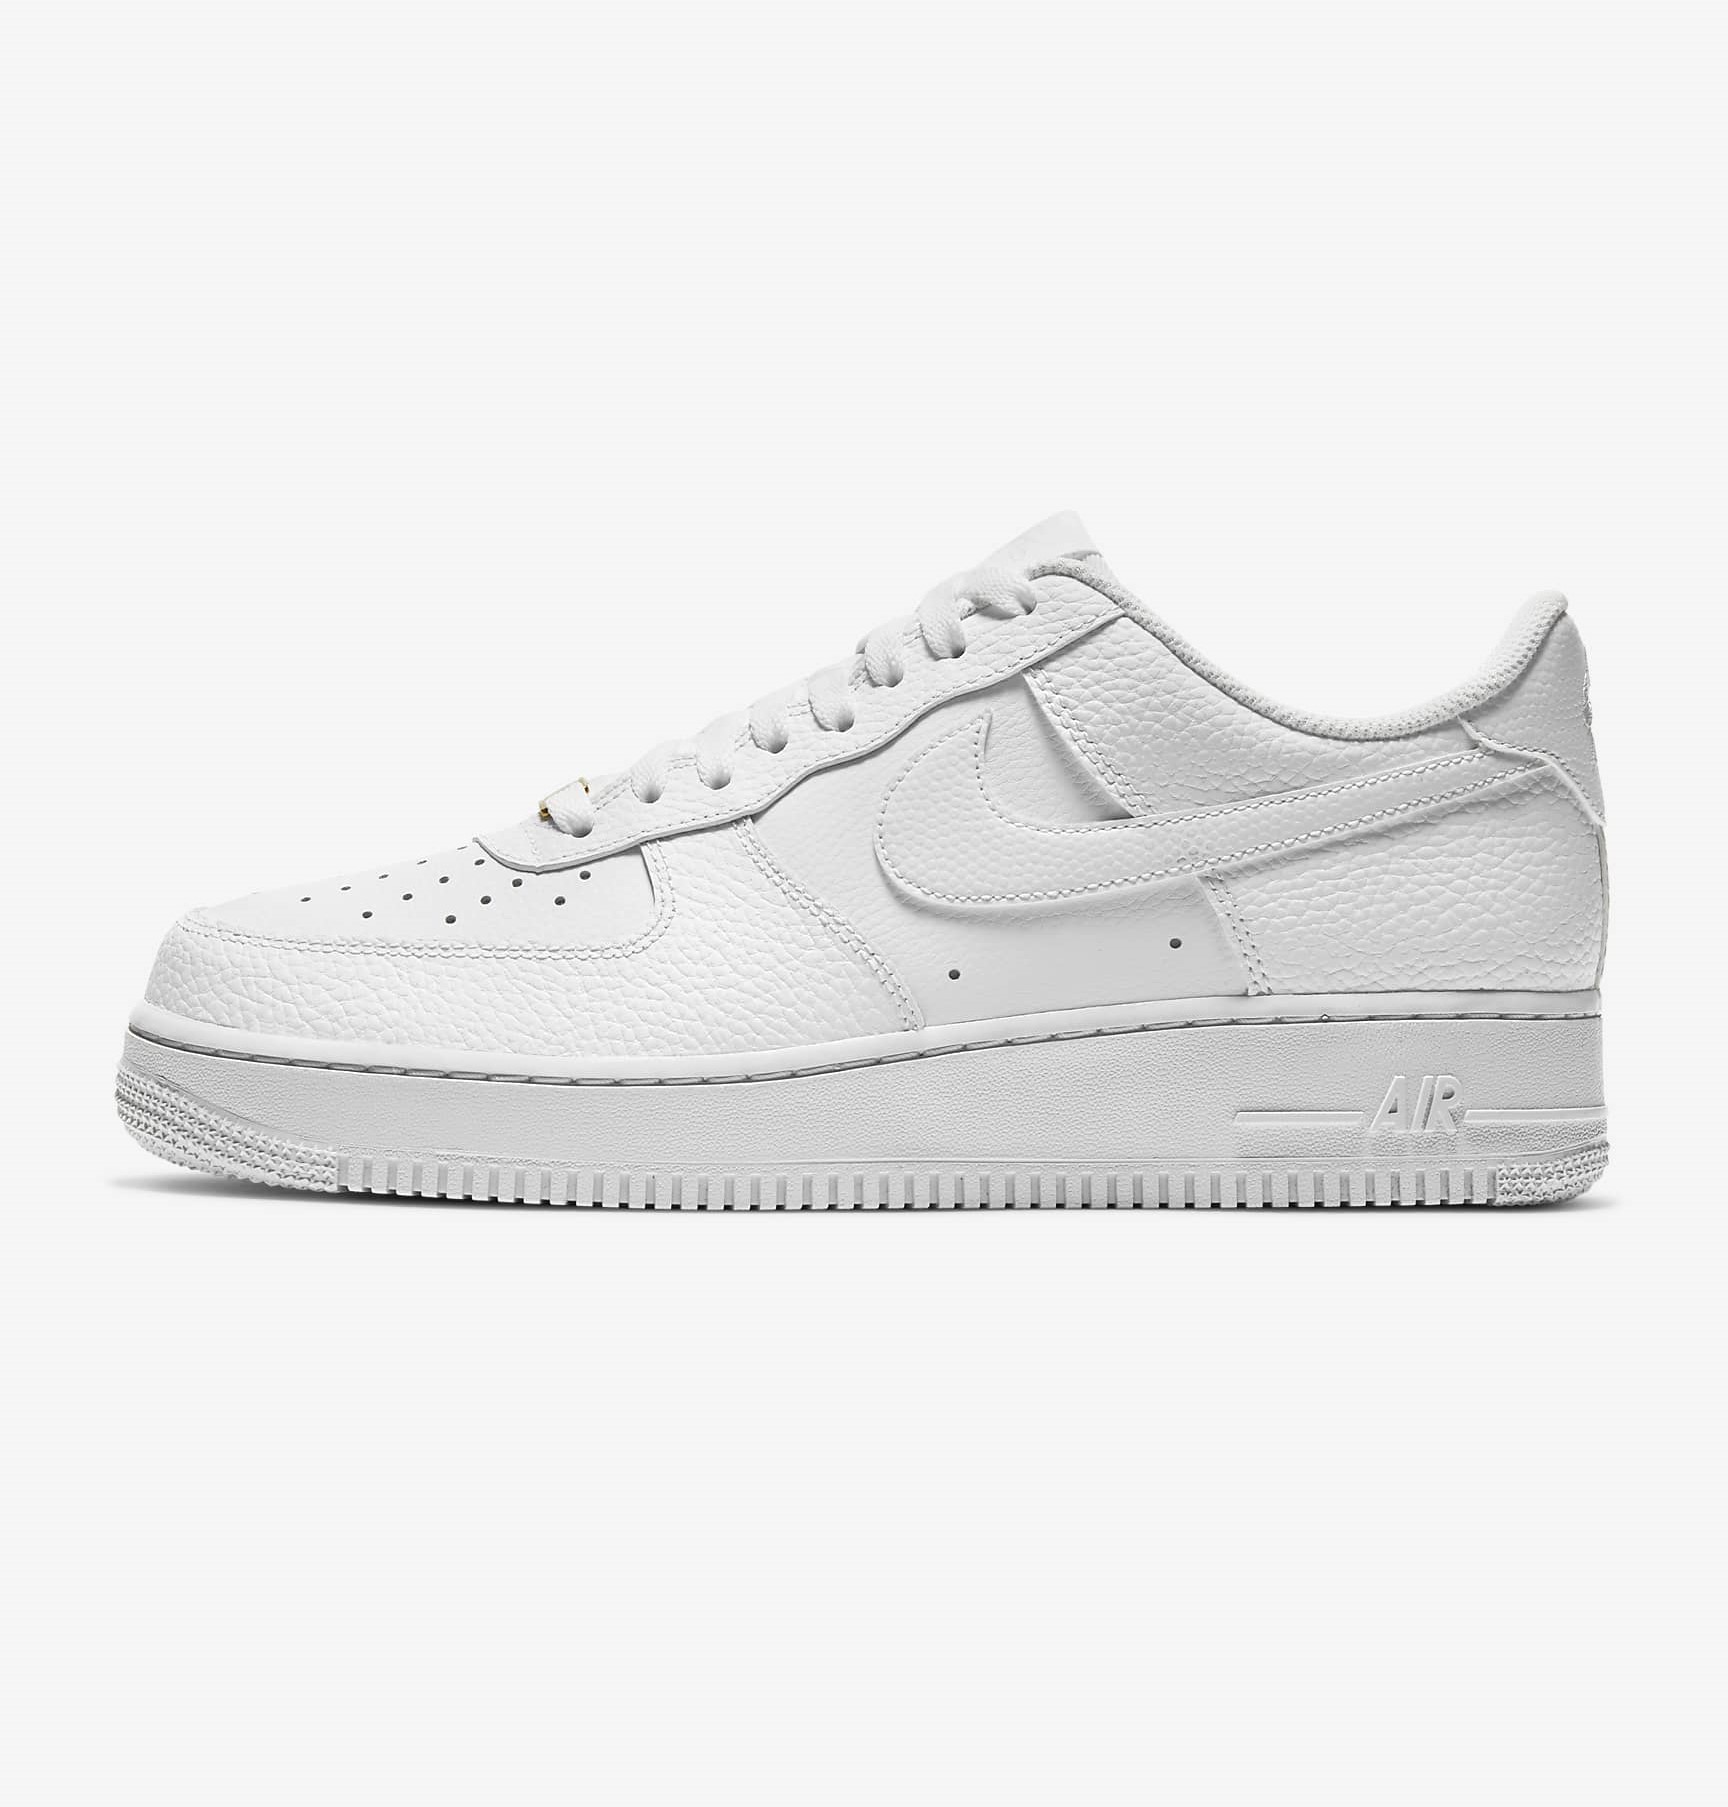 Nike Gives All-White Air Force 1 Low An Elegant Upgrade - Maxim